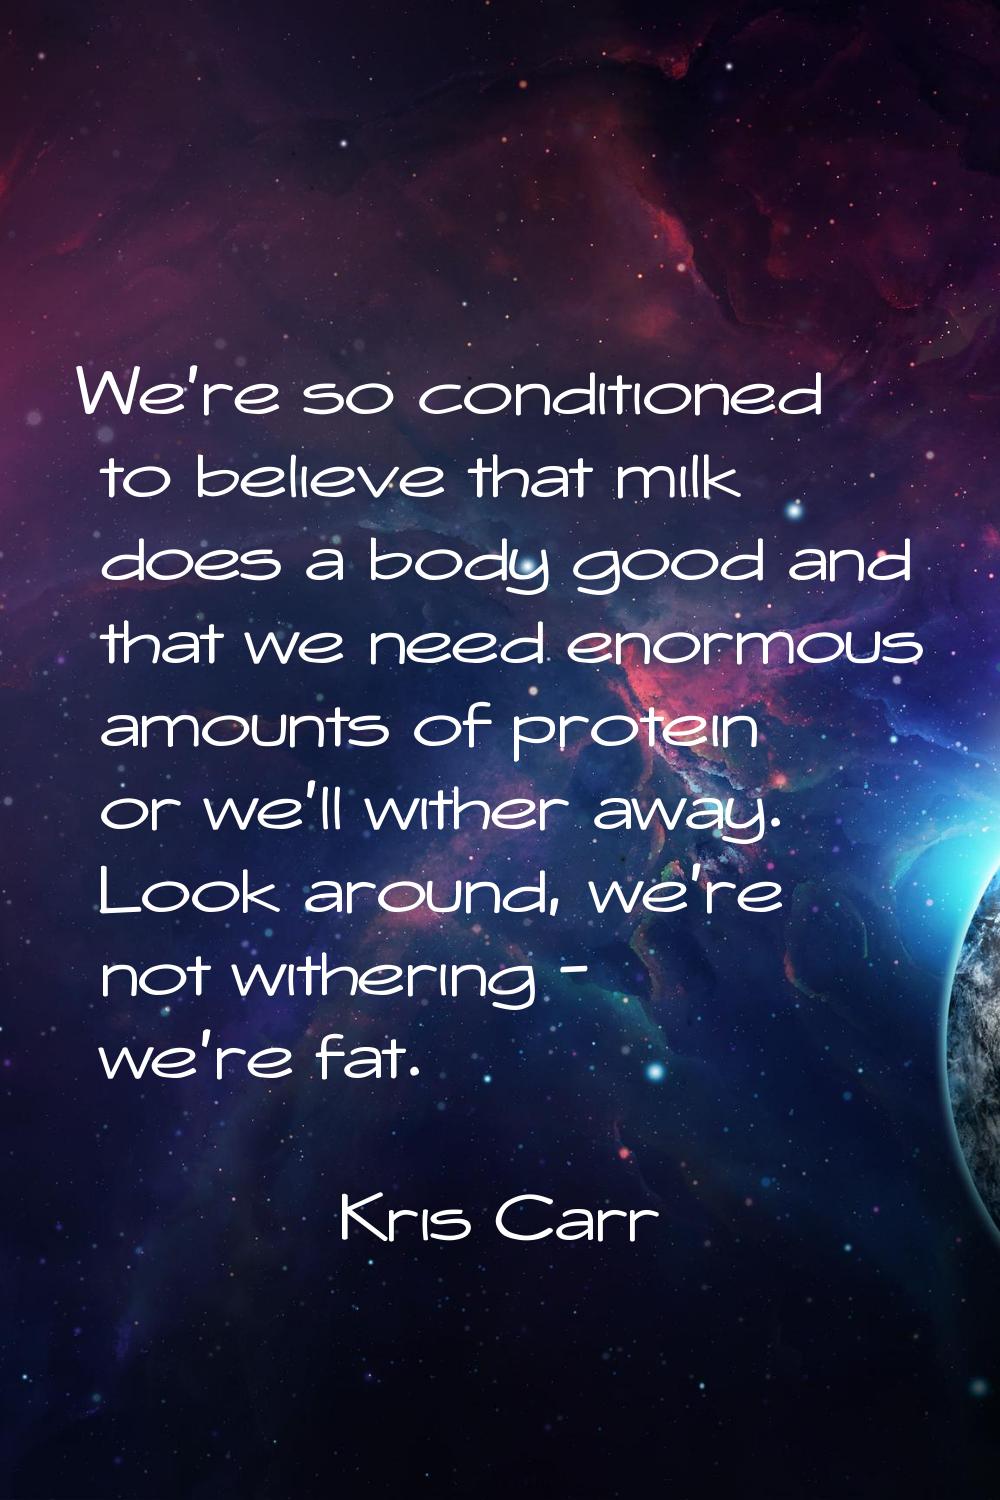 We're so conditioned to believe that milk does a body good and that we need enormous amounts of pro